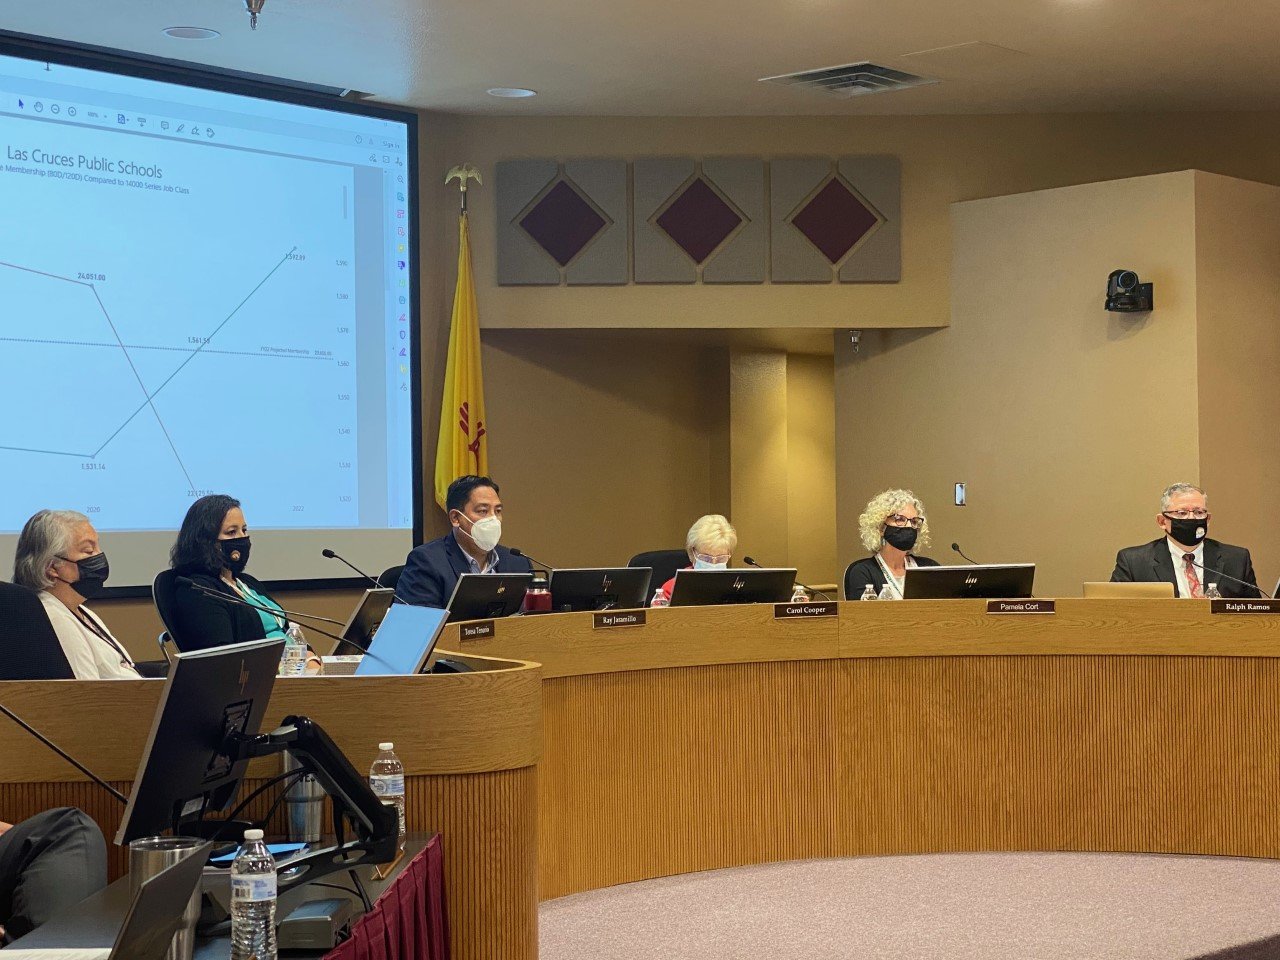 Members of the Las Cruces Public Schools Board of Education at an Aug. 3 work session in the Dr. Karen M. Trujillo Administrative Complex are, left to right, Maria Flores, Teresa Tenorio, Ray Jaramillo, Carol Cooper and Pamela Cort. LCPS Superintendent Ralph Ramos is at far right.